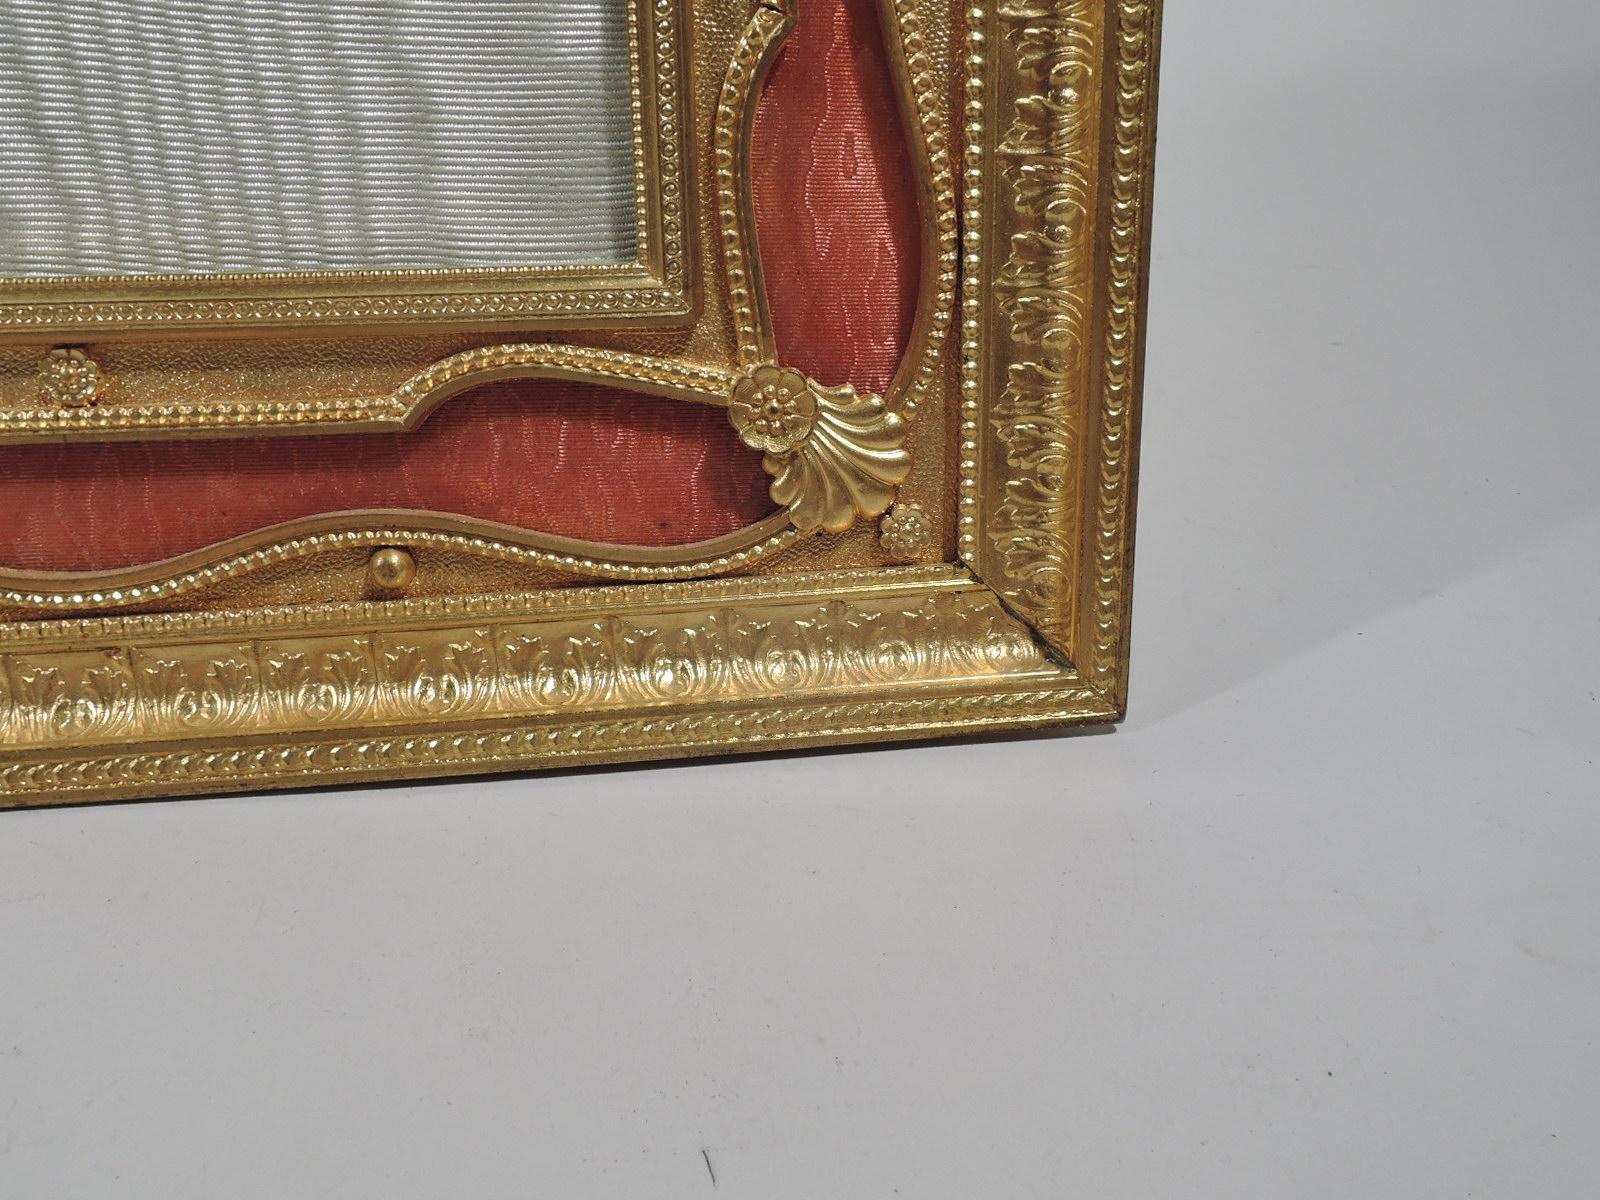 Rococo Revival French Rococo Gilt Bronze Picture Frame with Enamel Ribbon Border For Sale